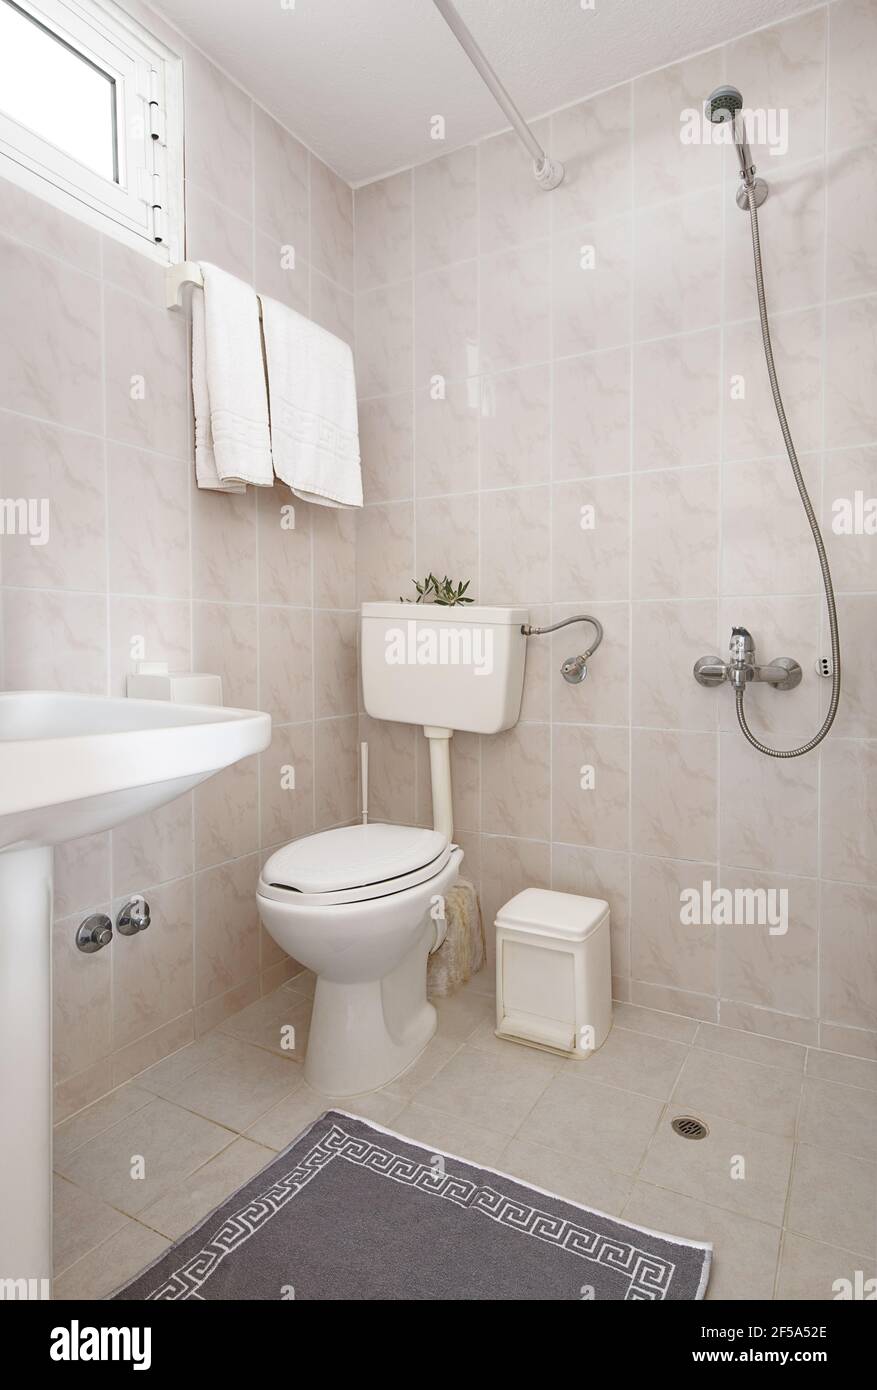 Simple style interior of small restroom with beige ceramic tile walls, white sink, classic WC toilet, grey meander ornament carpet, open shower withou Stock Photo